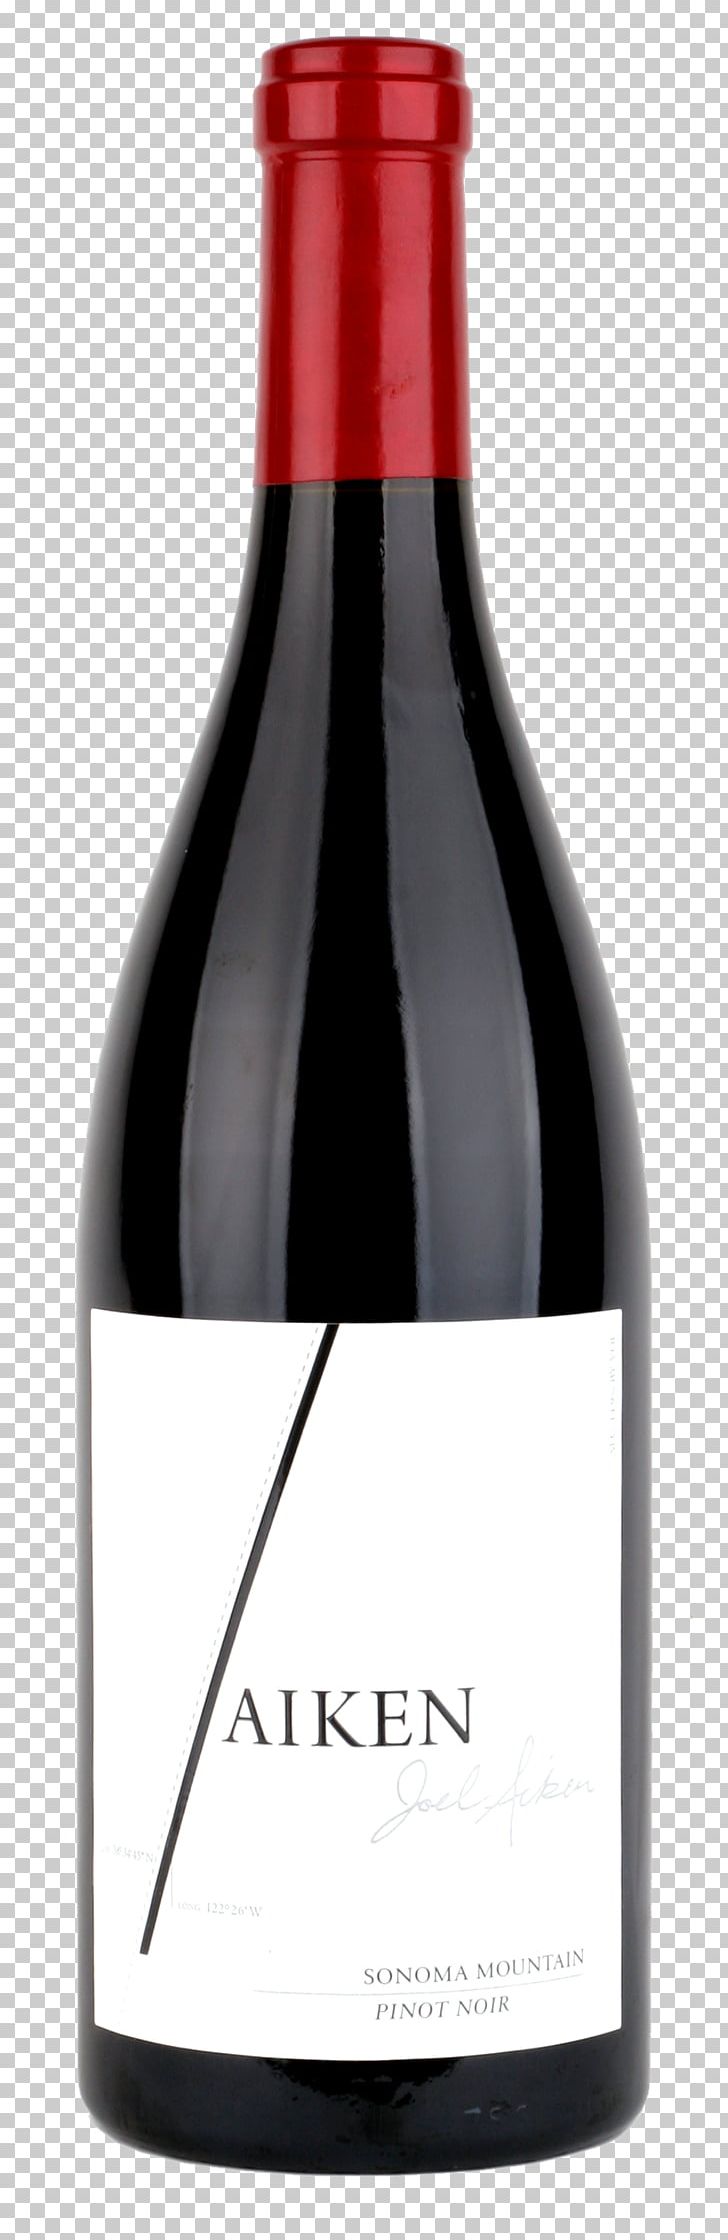 Red Wine Champagne Bottle PNG, Clipart, Alcoholic, Bottle, Common Grape Vine, Drink, Drinkware Free PNG Download